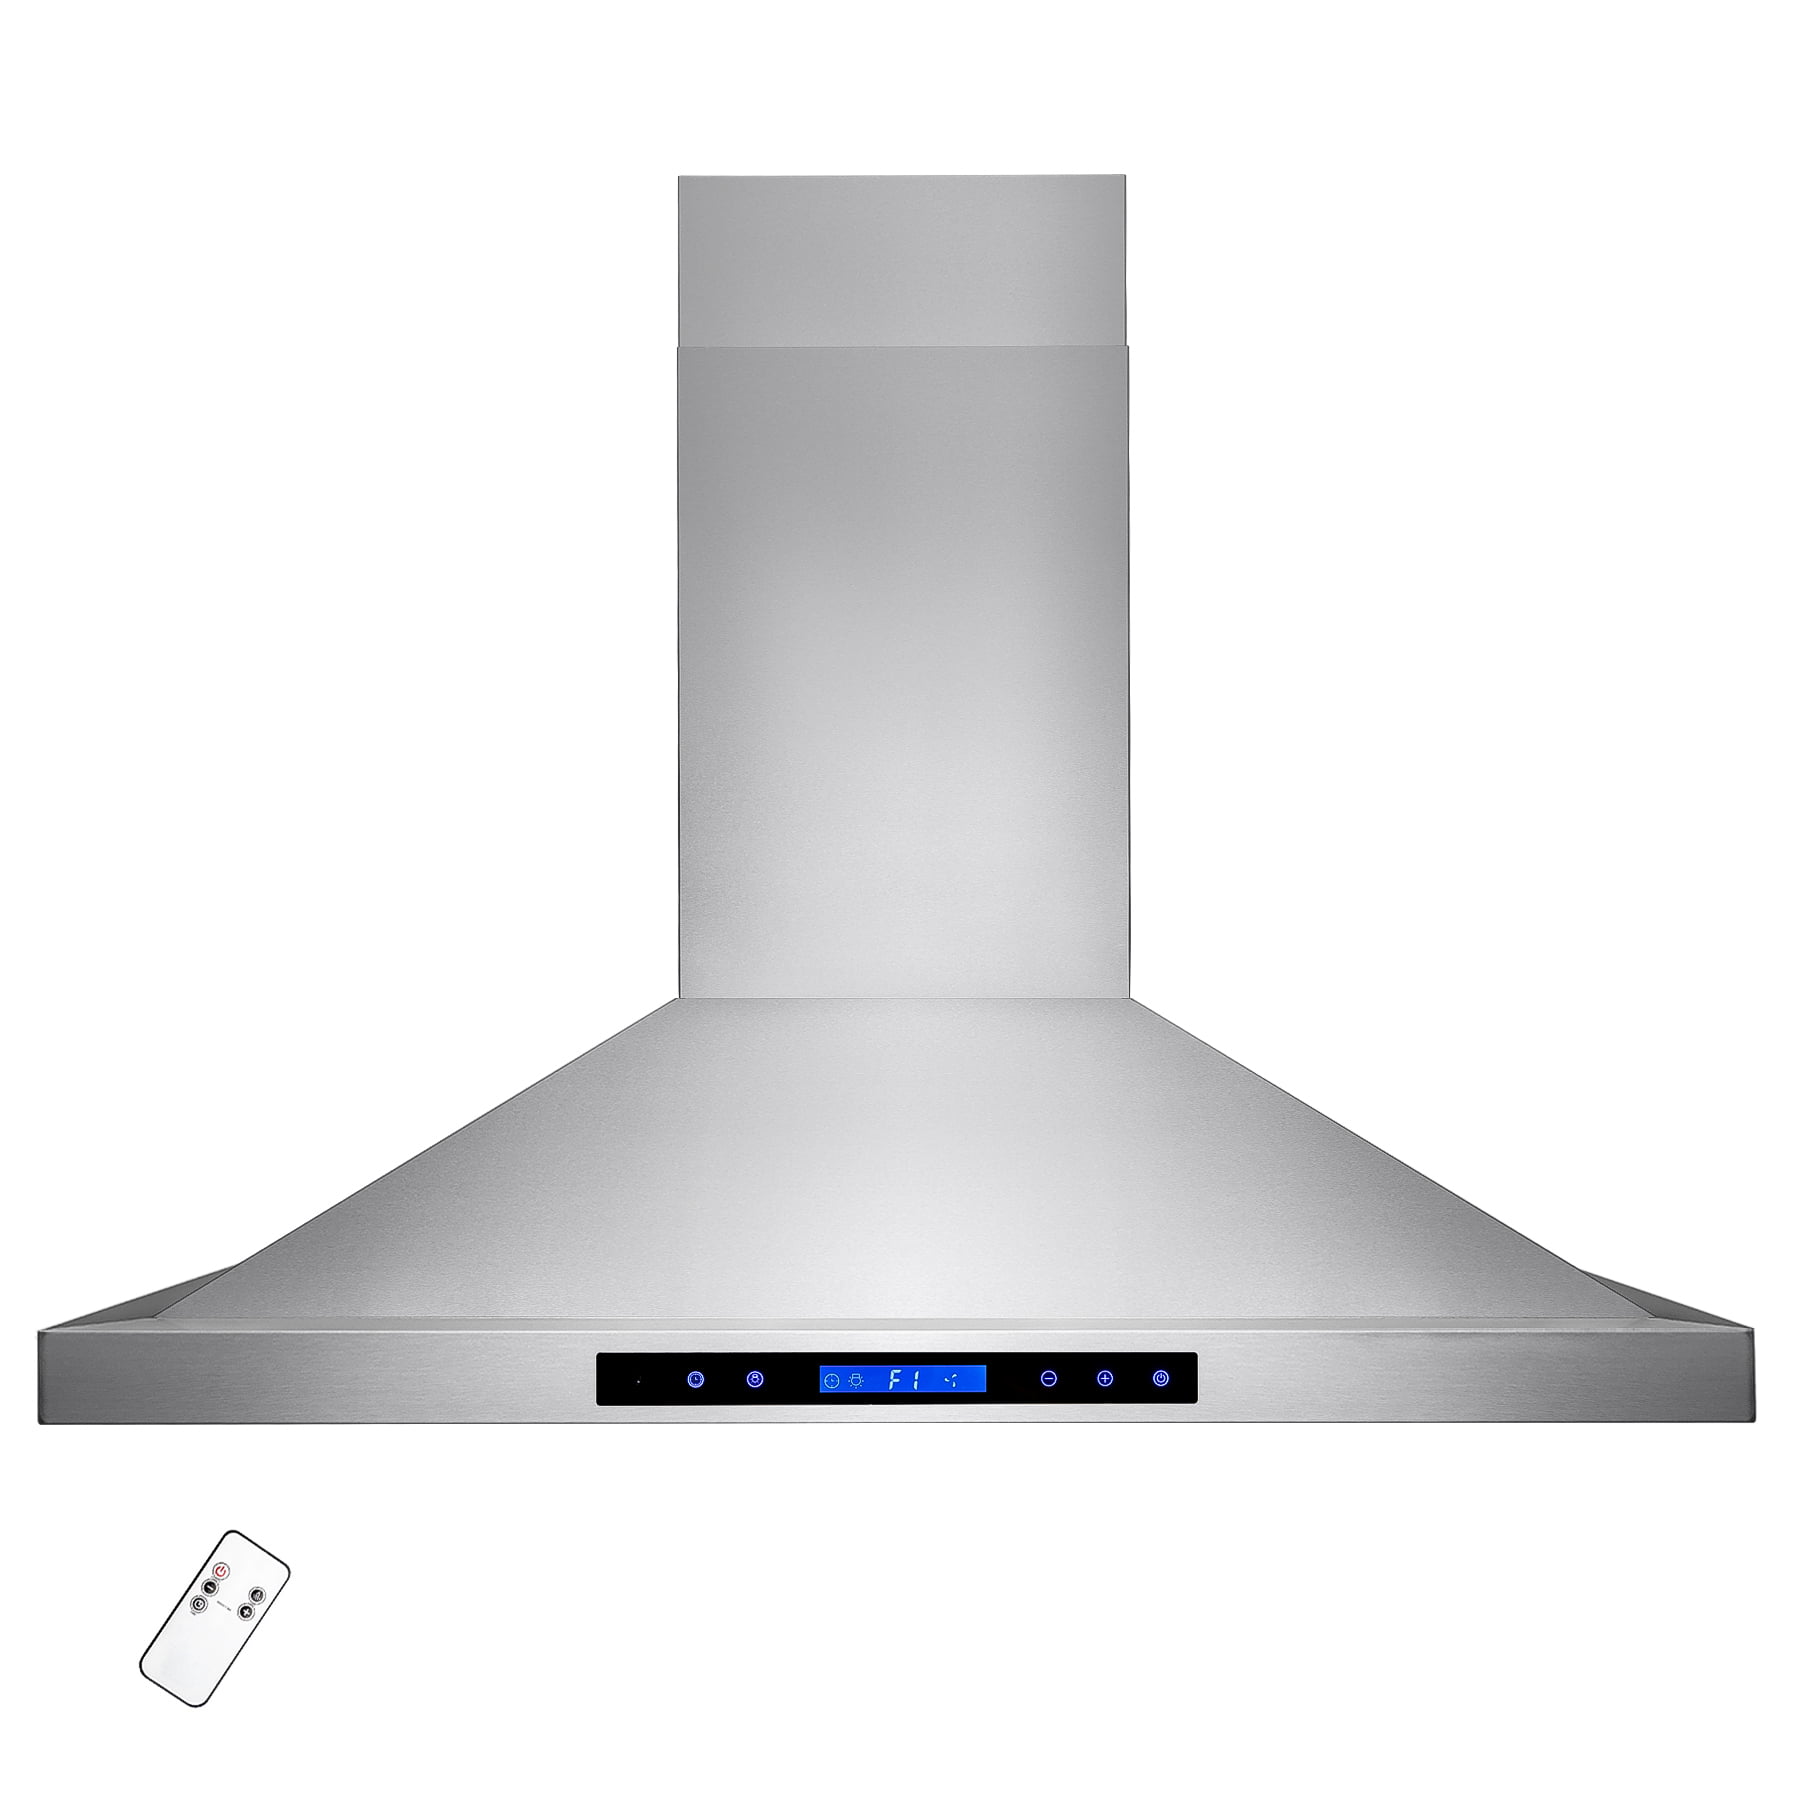 AKDY 36 Island Mount Stainless Steel Both Side Range Hood W/Baffle Filter Remote Control Kitchen Stove Vent 